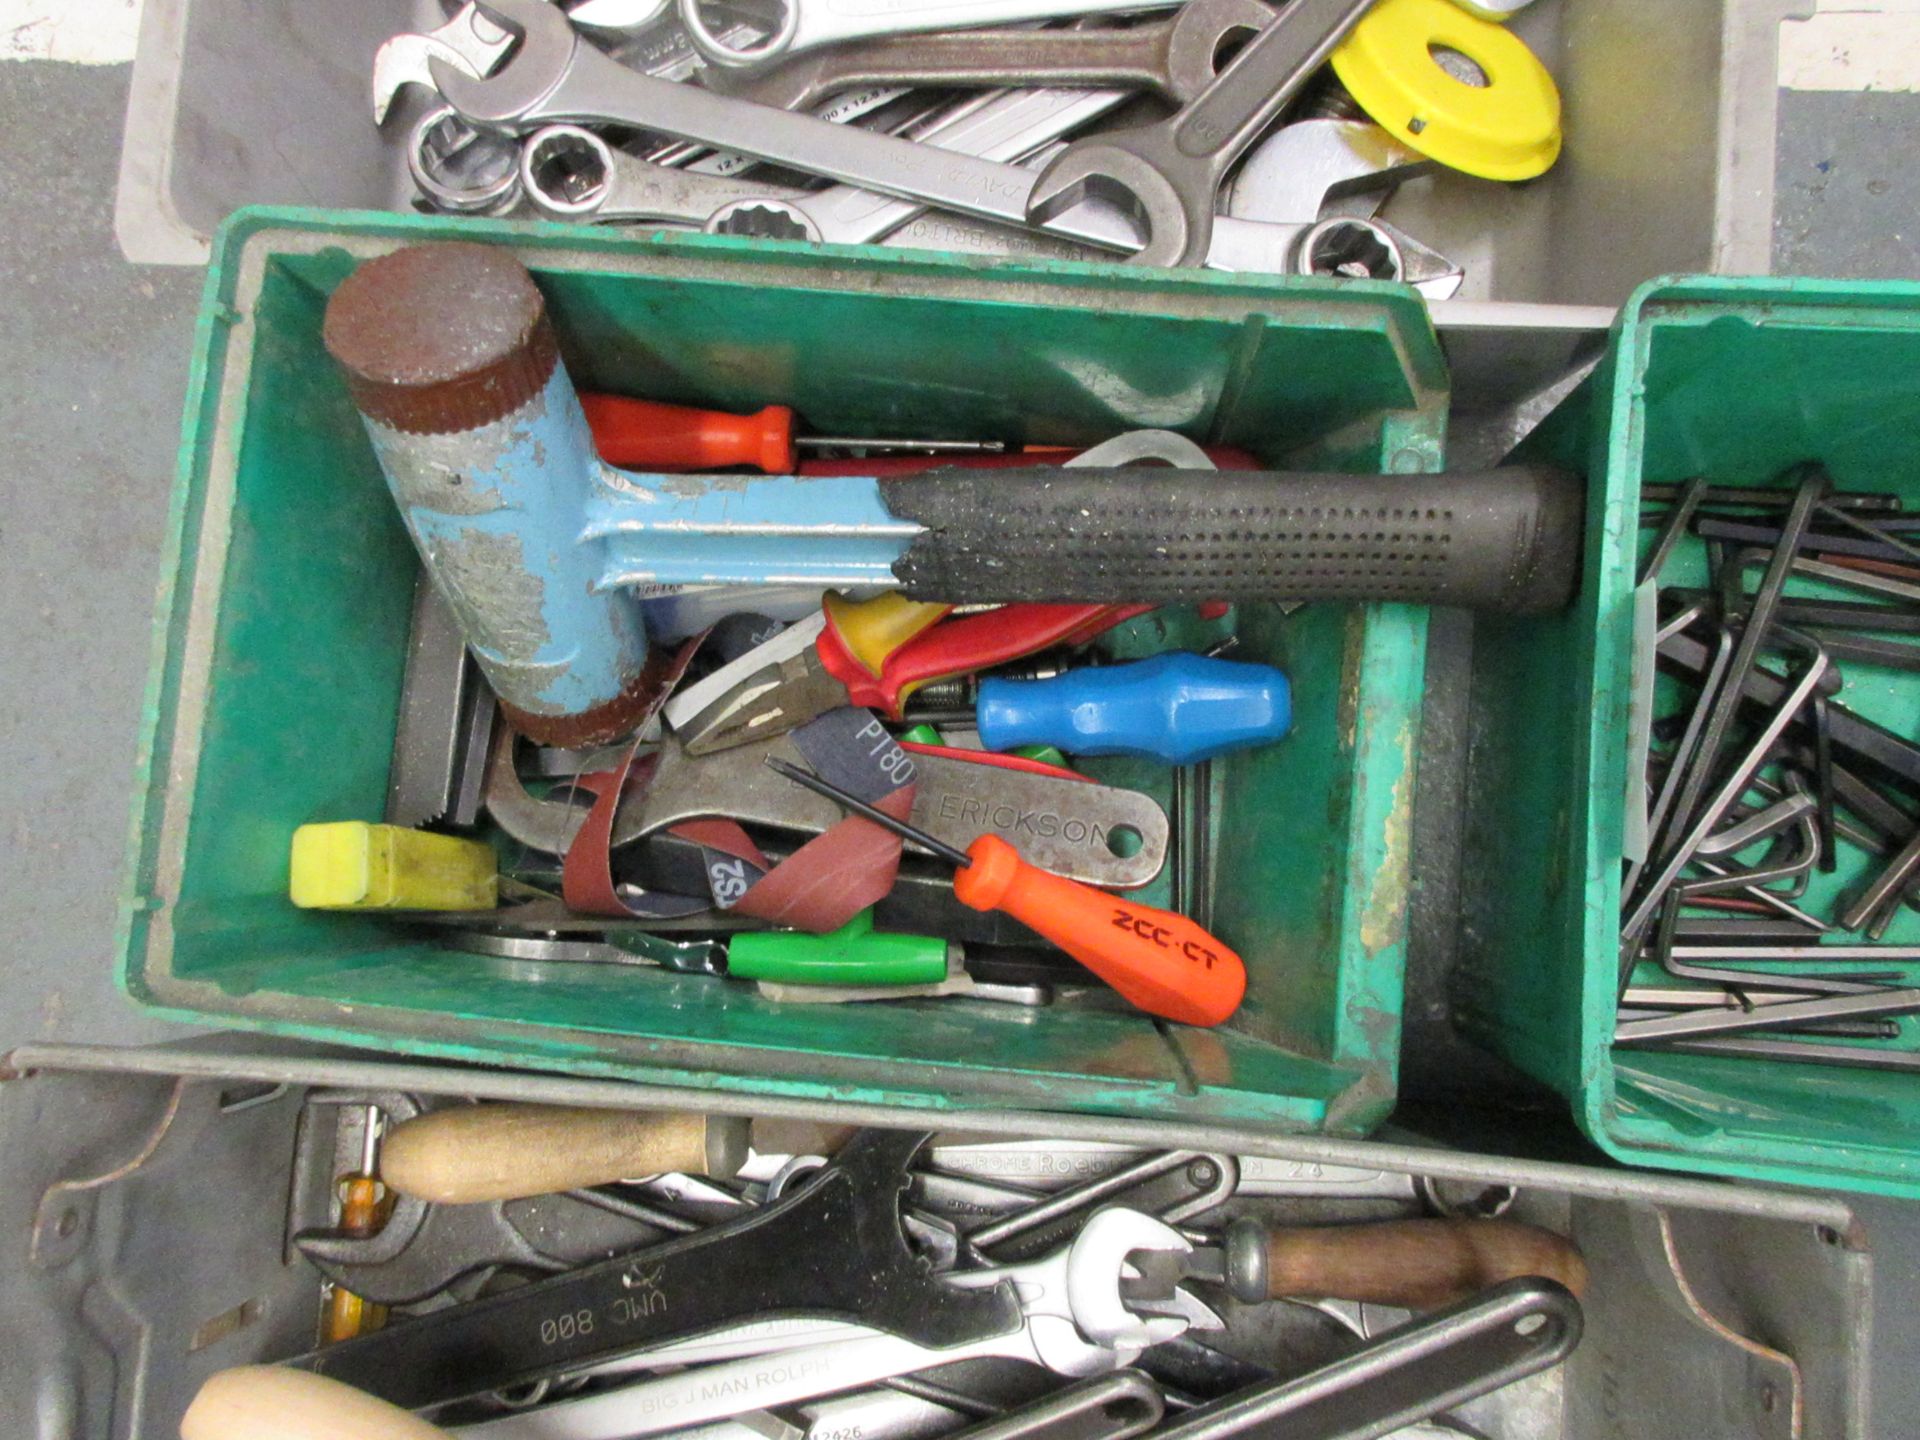 Assorted hand tools including spanners, allen keys, mallets, etc. - Image 3 of 6